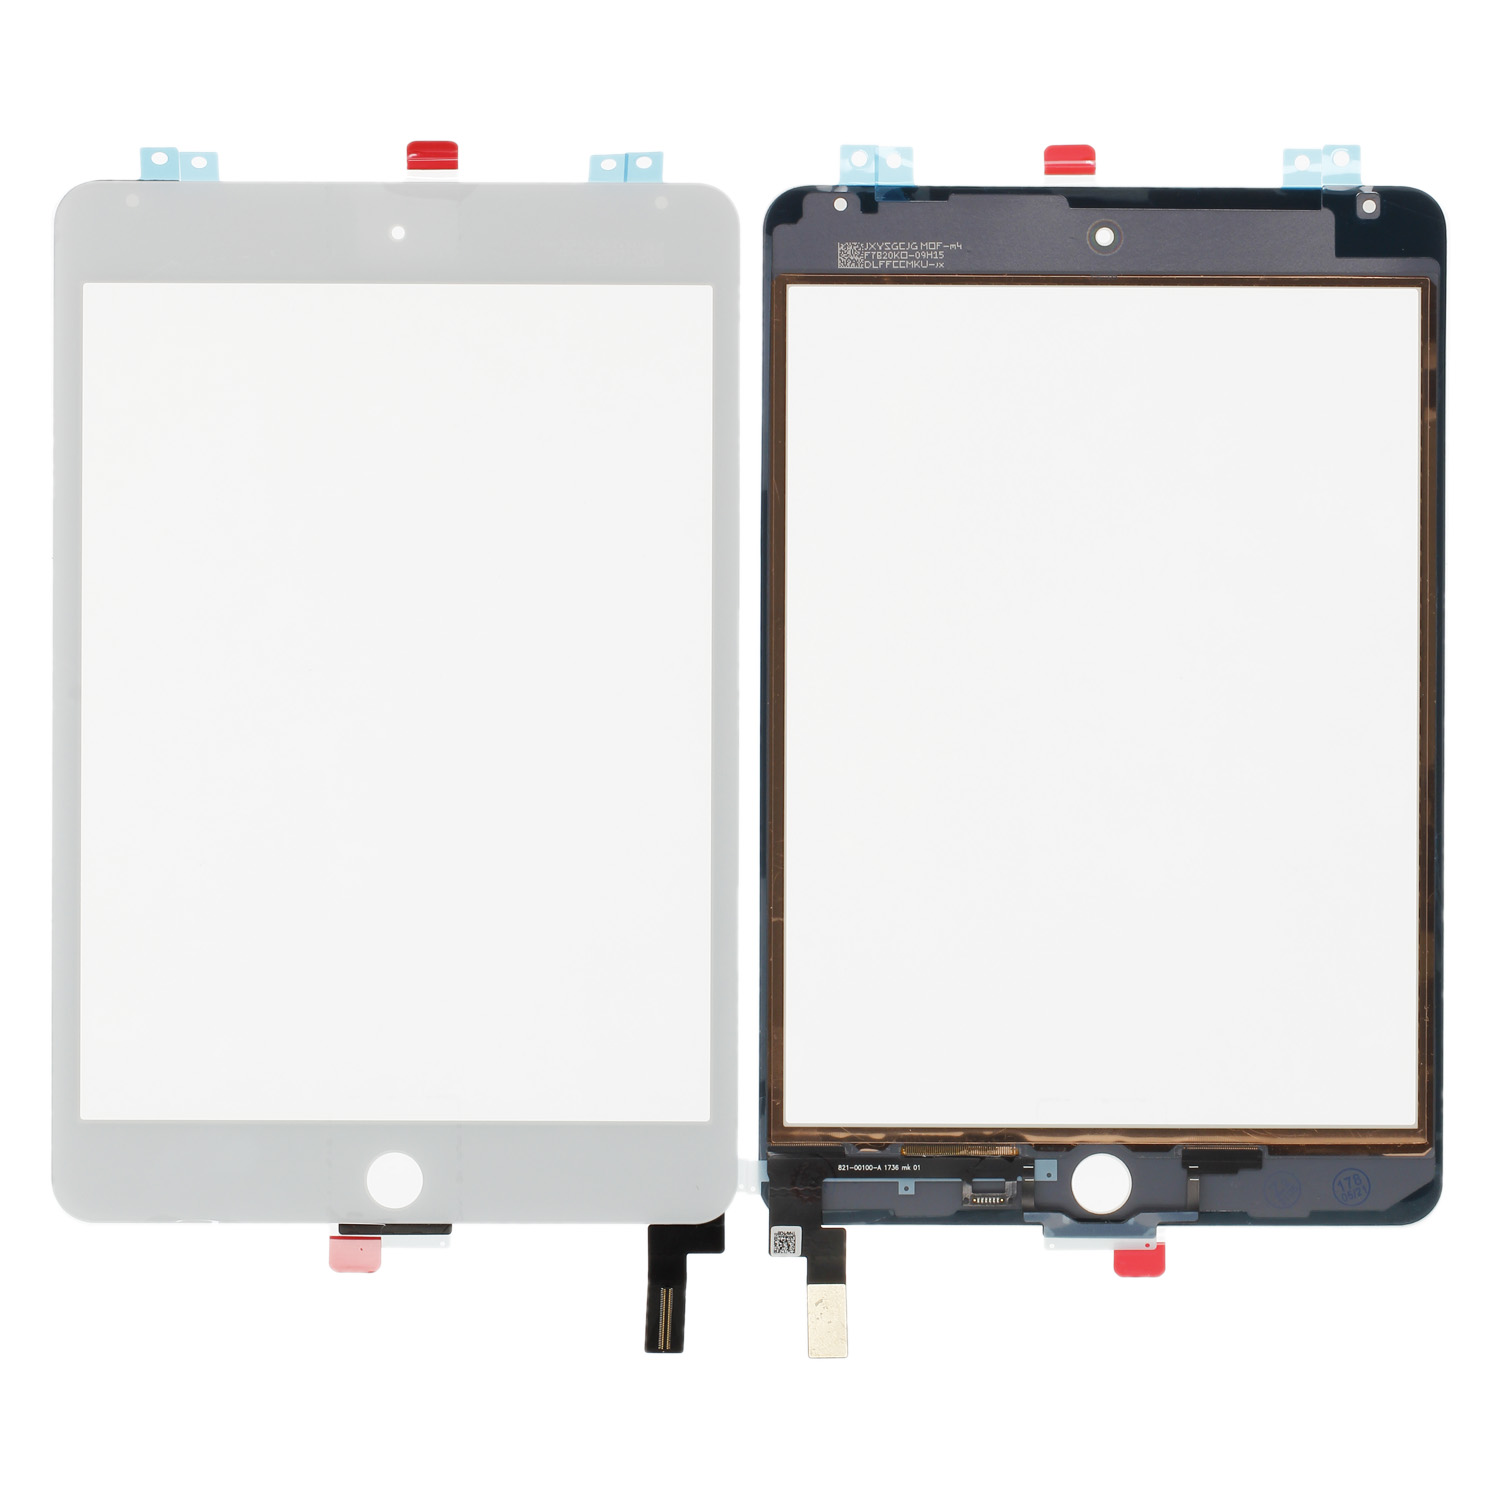 Touch Screen compatible with iPad mini 4 7.9" (2015) White (A1538,A1550)